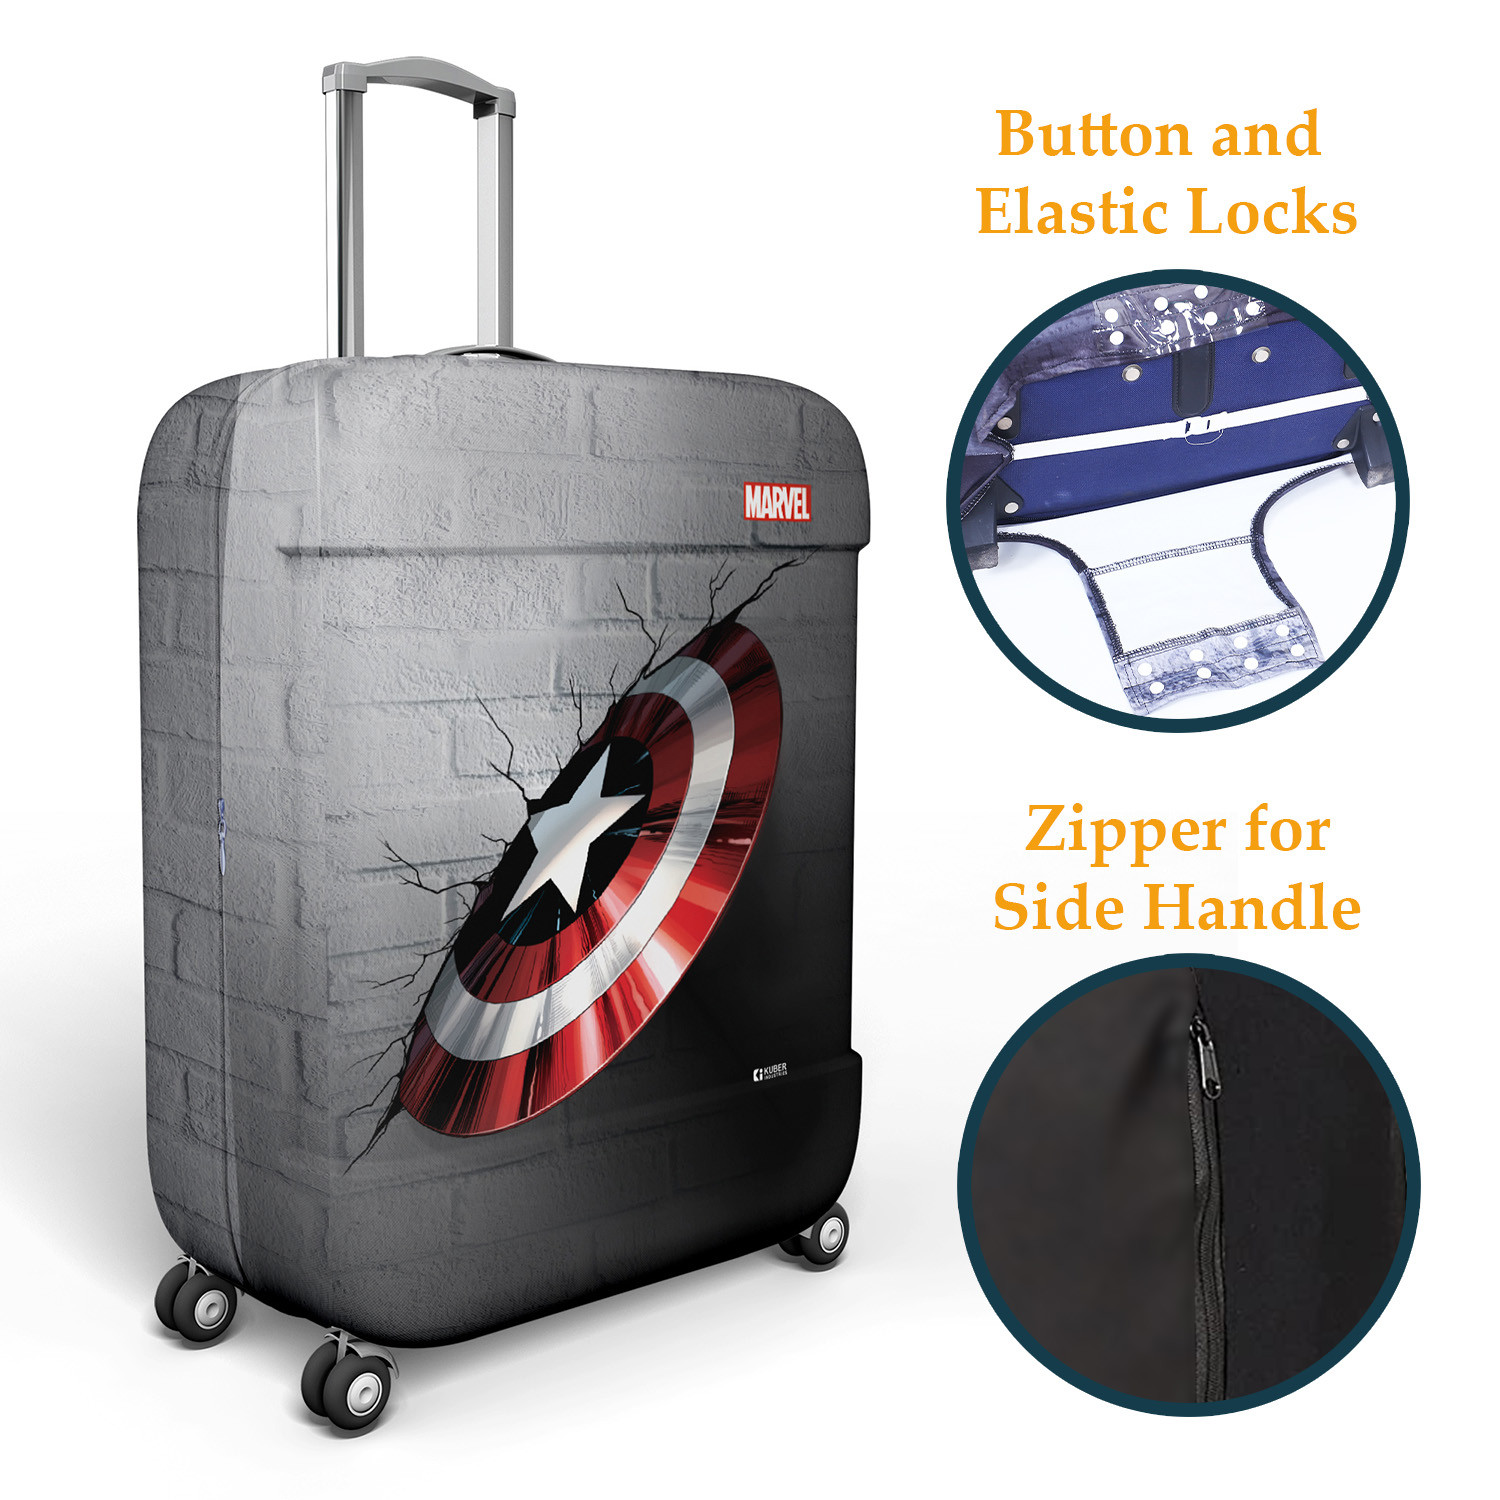 Kuber Industries Marvel Captain America Shield Luggage Cover|Polyester Travel Suitcase Cover|Washable|Stretchable Suitcase Cover|22-26 Inch-Medium|26-30 Inch-Large|Pack of 2 (Gray)